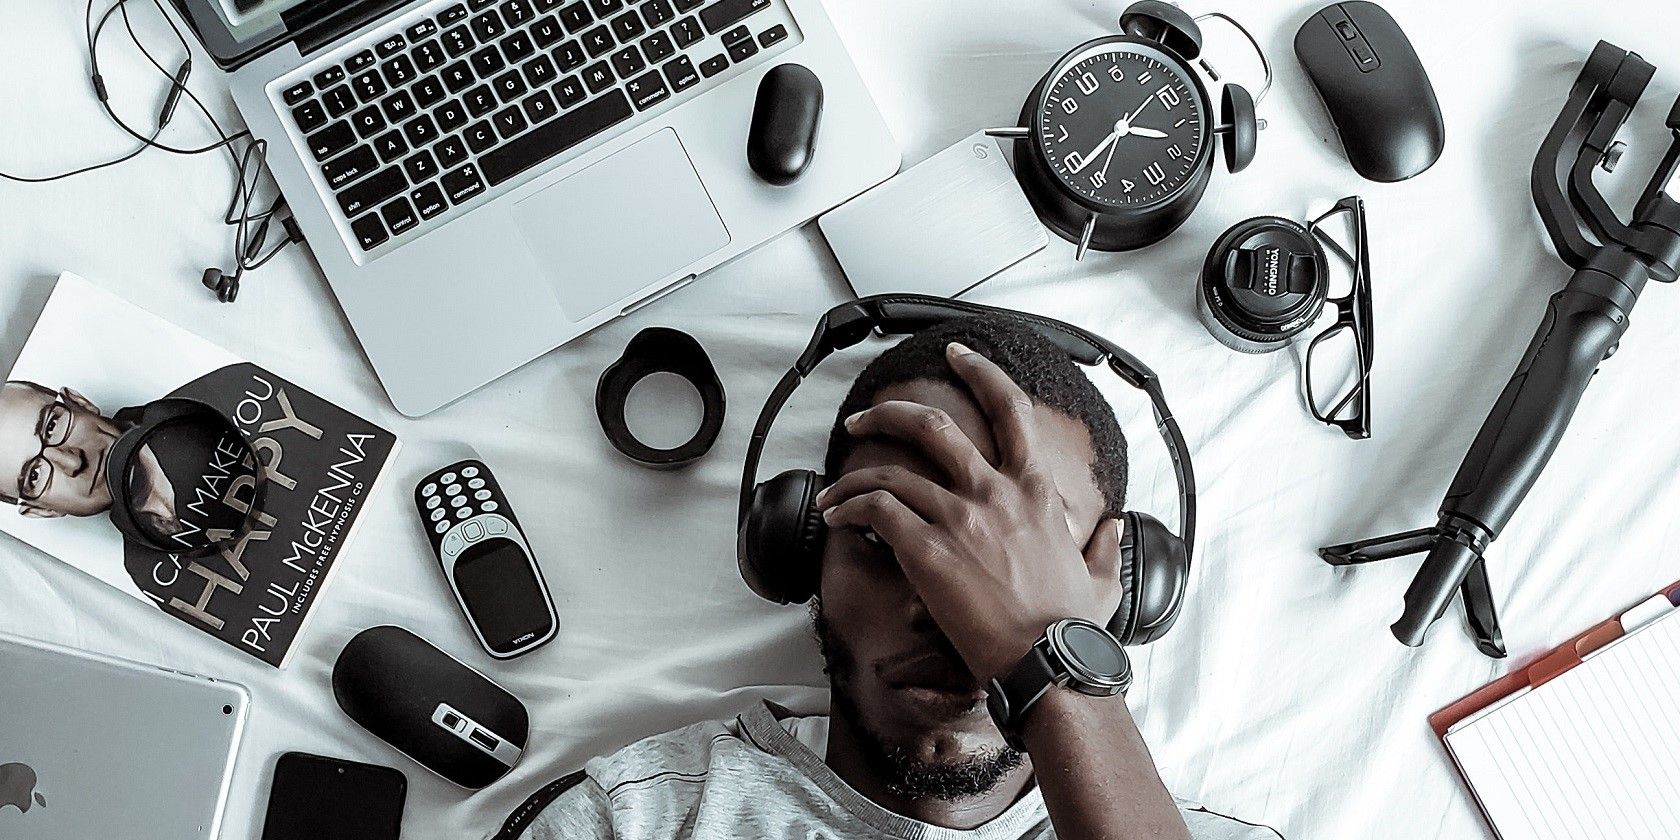 Man in black headphones covering his eyes surrounded by technology devices